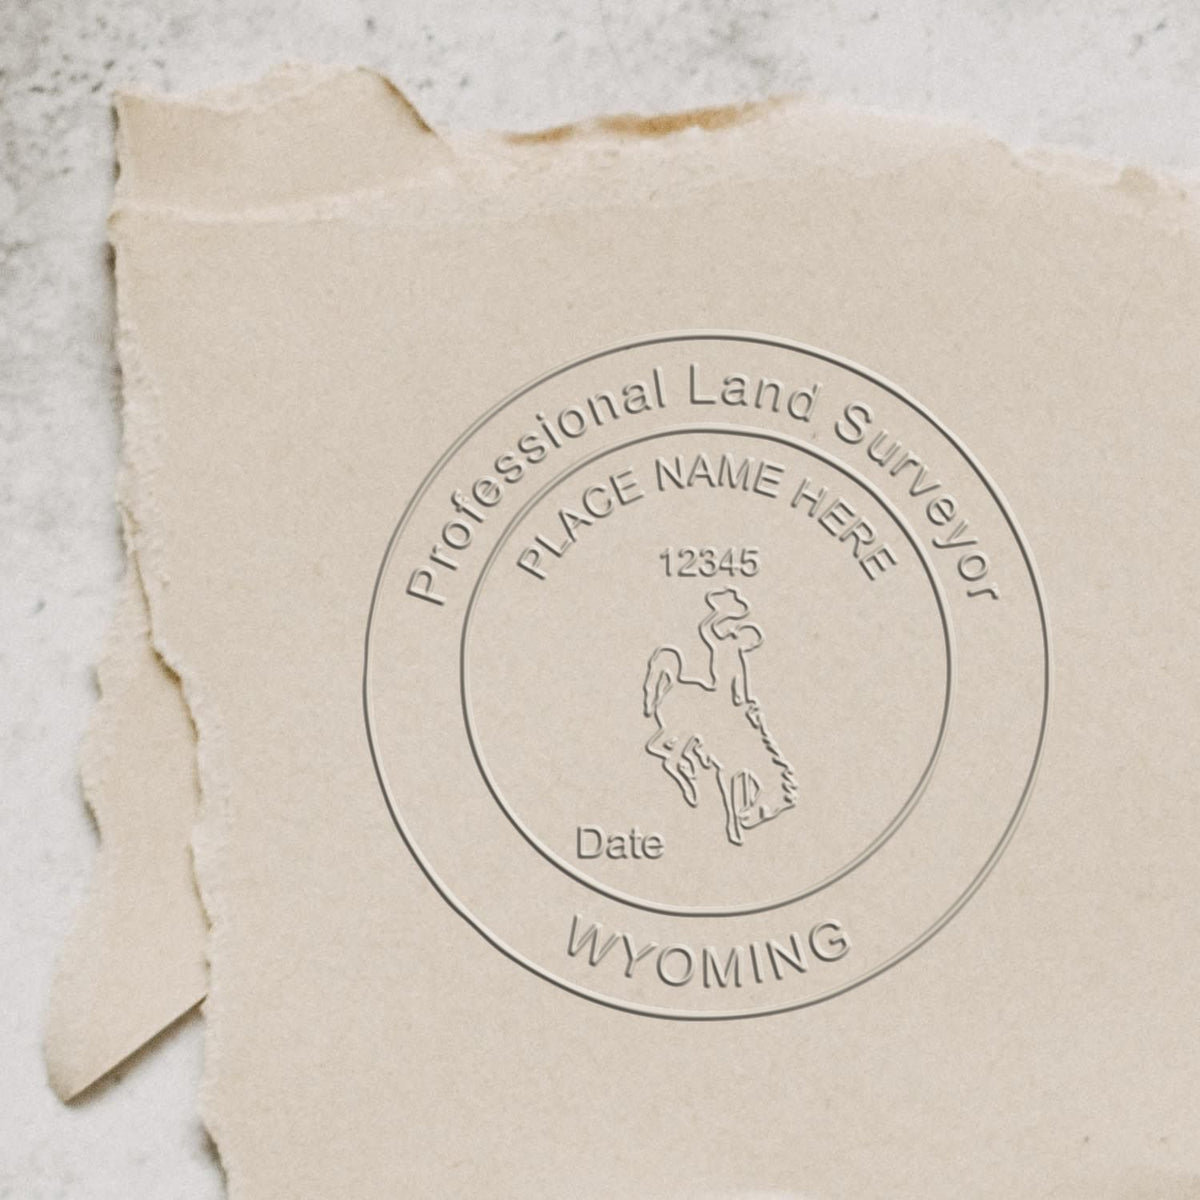 A photograph of the State of Wyoming Soft Land Surveyor Embossing Seal stamp impression reveals a vivid, professional image of the on paper.